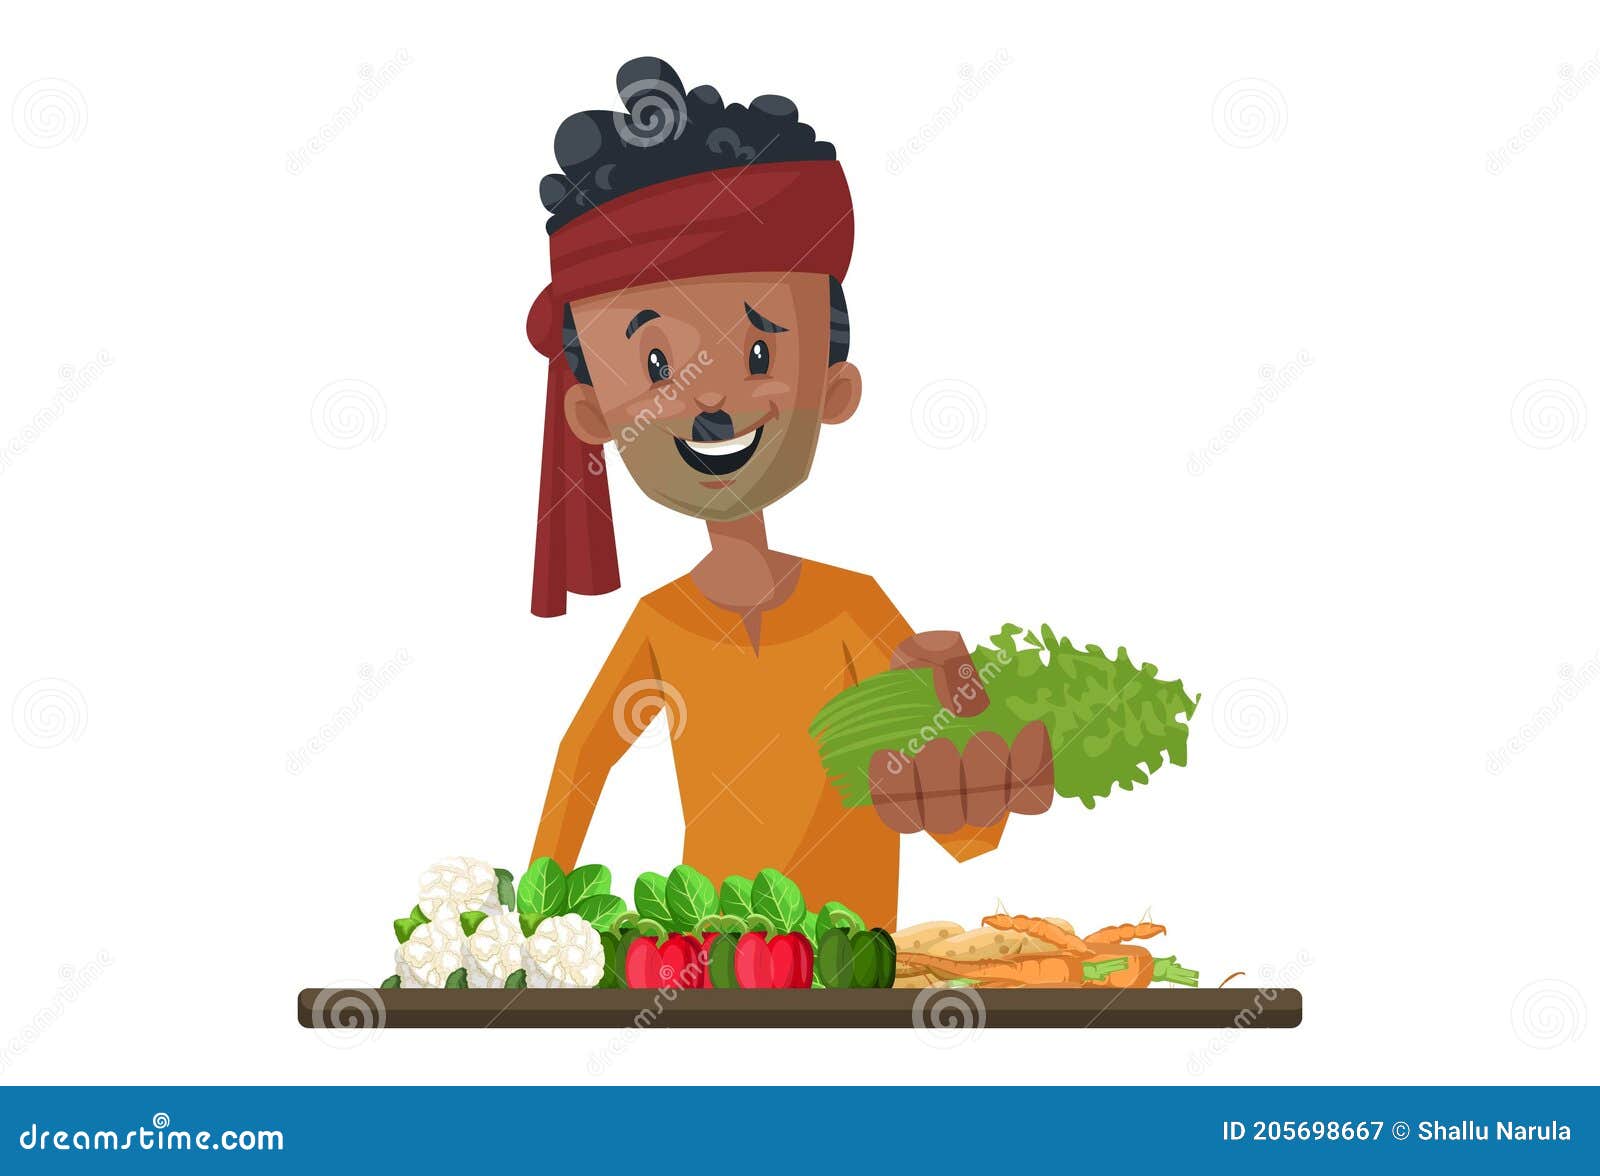  graphic  of vegetable seller